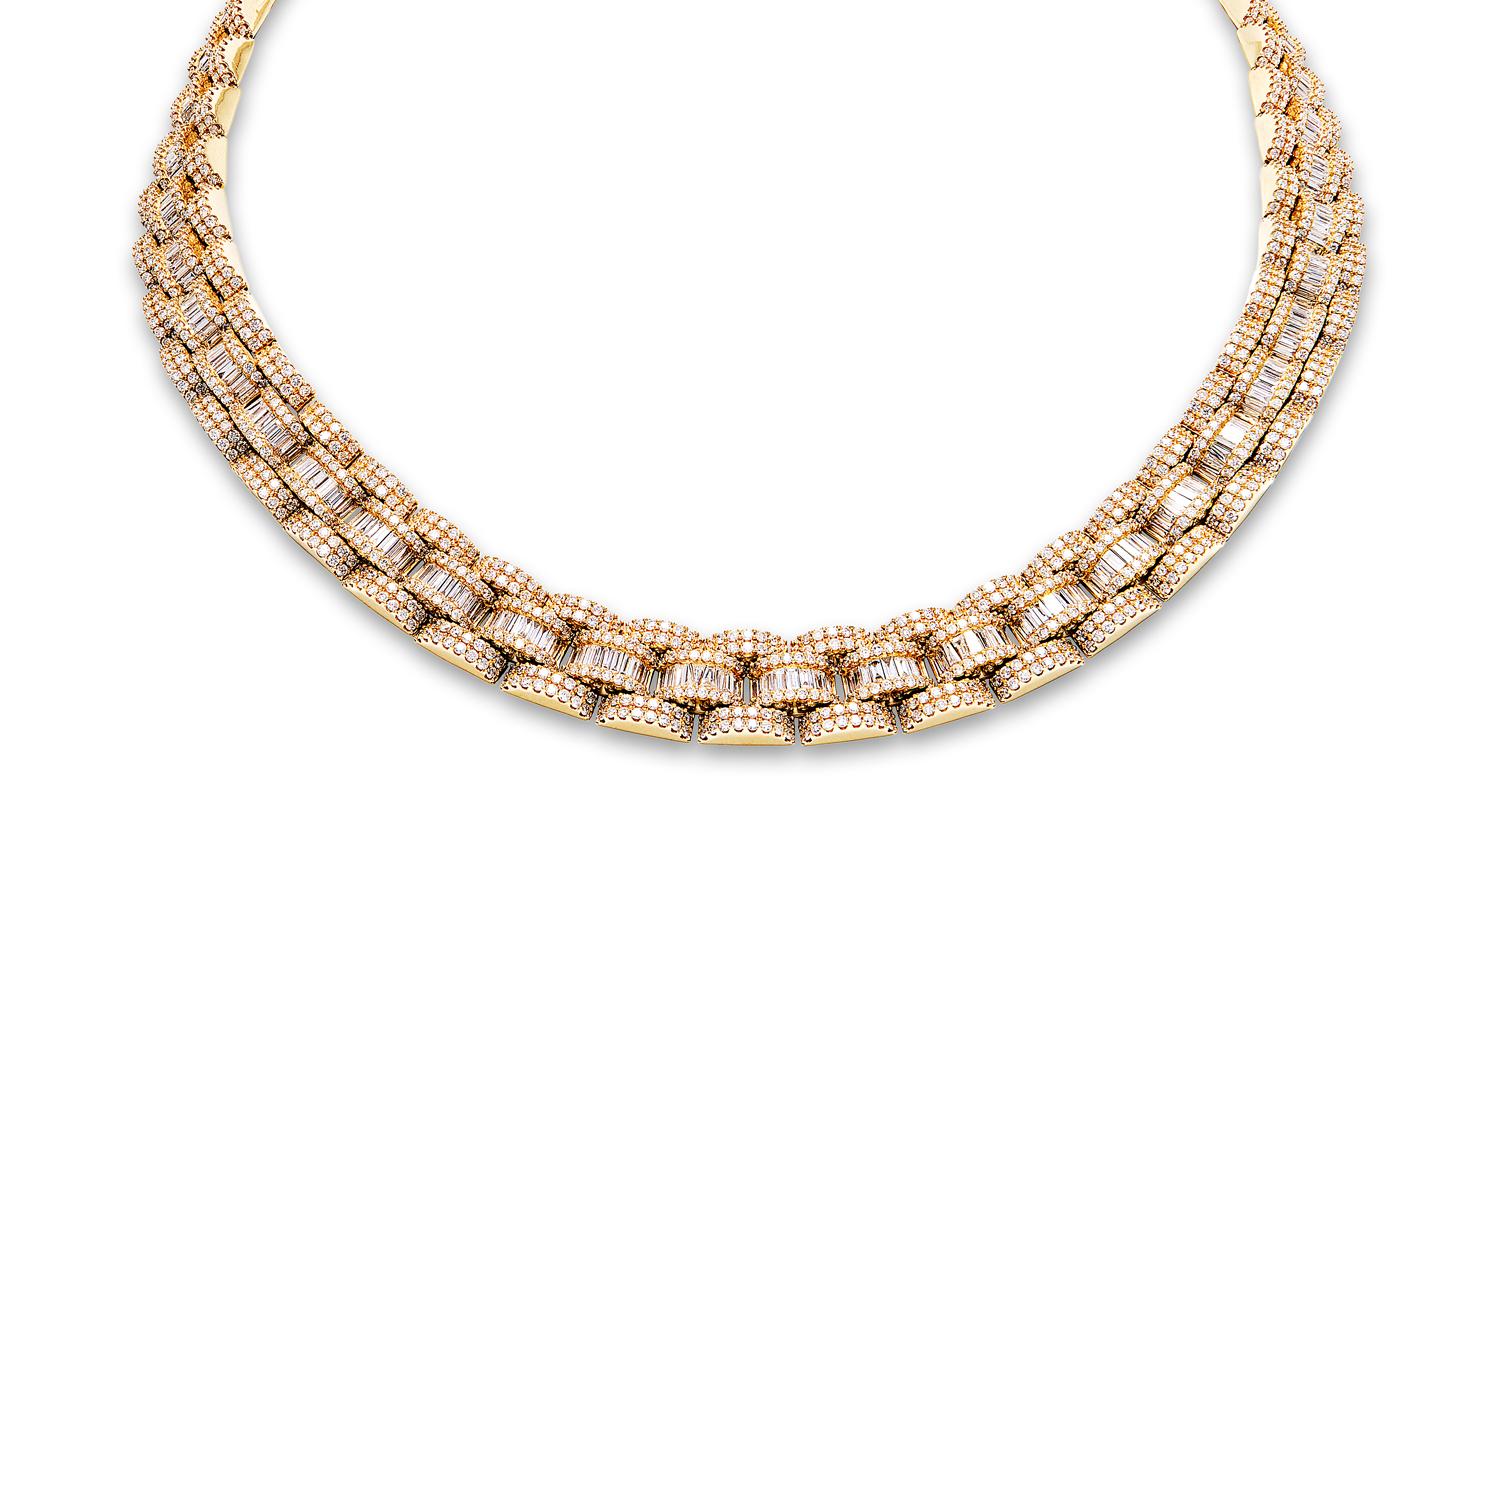 The perfect gift for someone you love, this beautiful and striking gold necklace features natural earth-mined diamonds that shine like bright stars in the night sky. Whether it’s for your husband, boyfriend, or best friend, this is a piece that